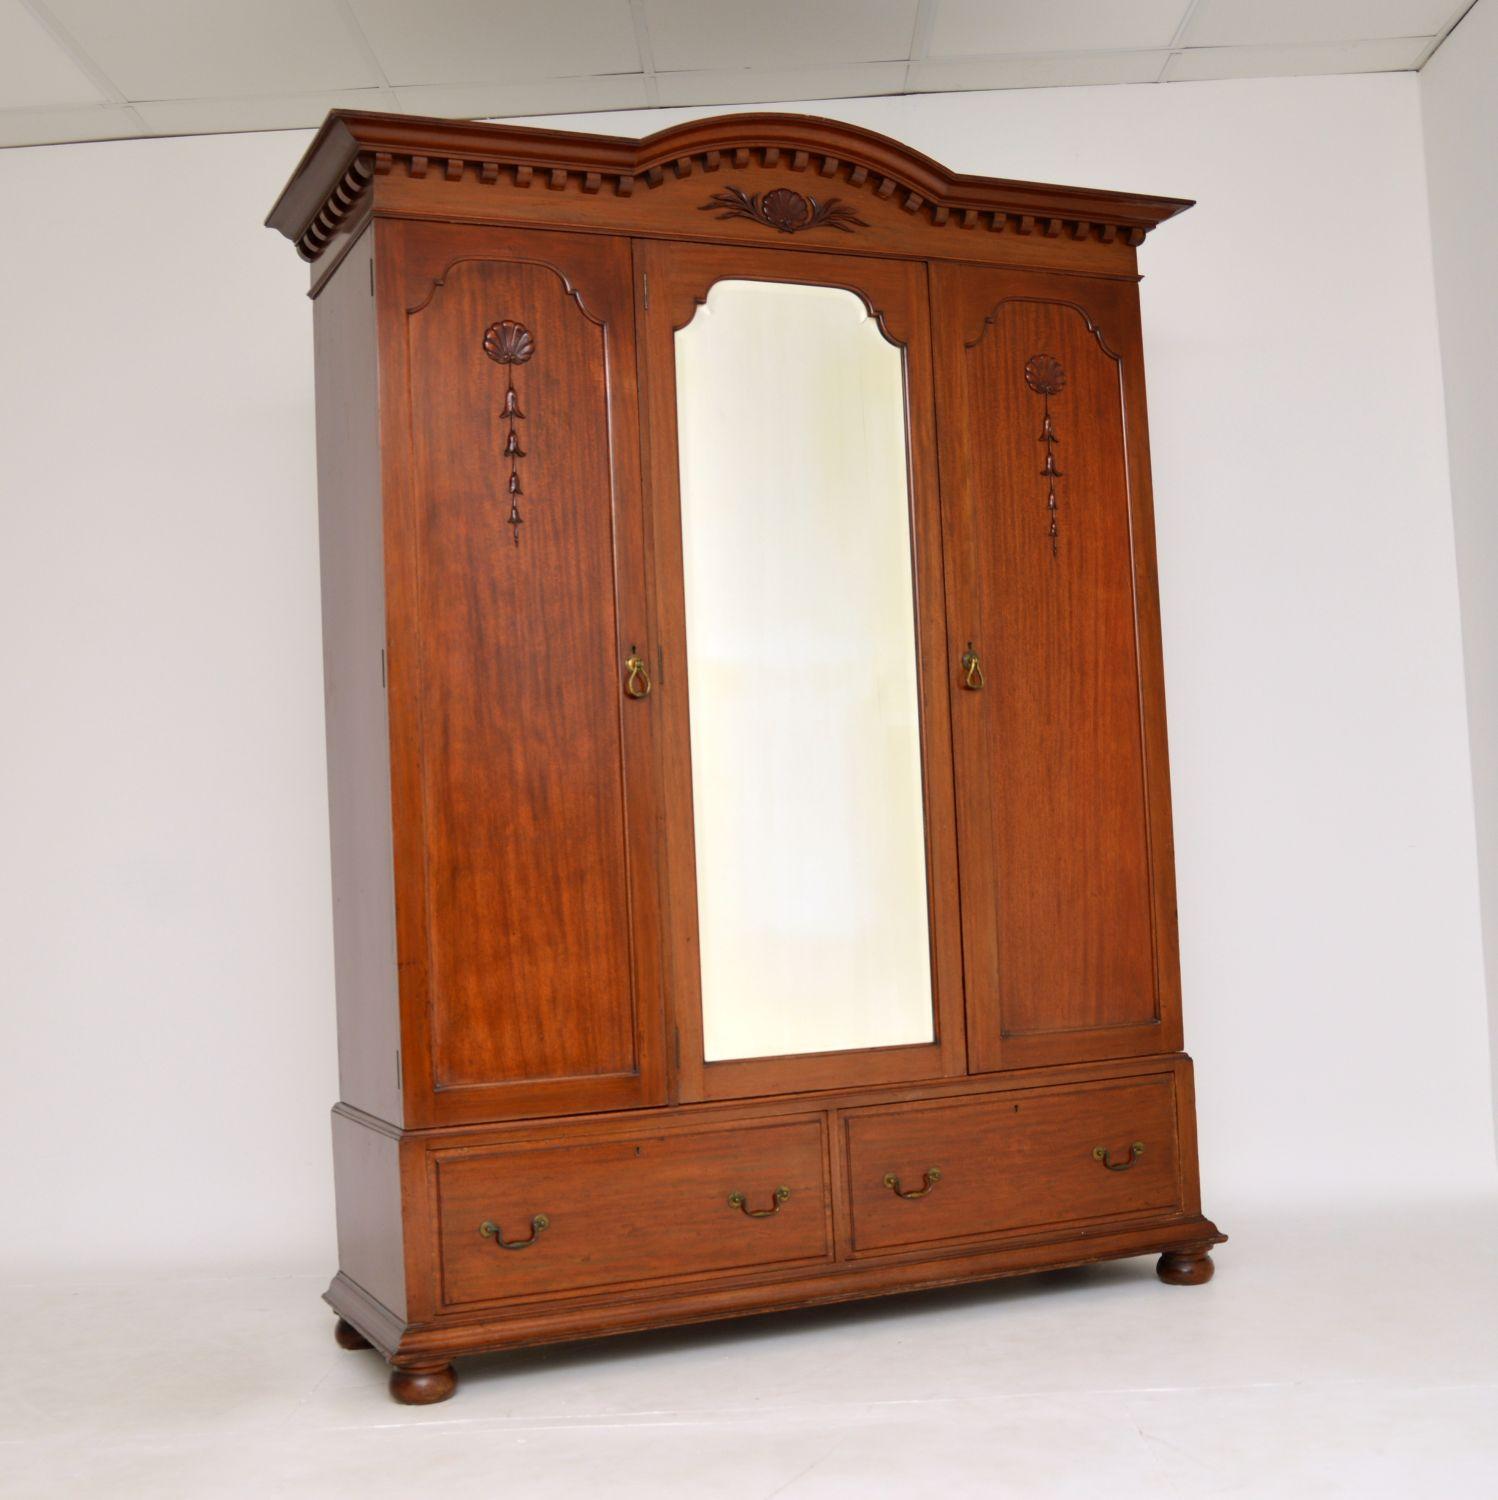 A top quality and very impressive antique Victorian wardrobe. This was made by the high end manufacturer James Shoolbred in England, and it dates from around 1880-1900 period.

This is very well made and it is a great size, large and impressive